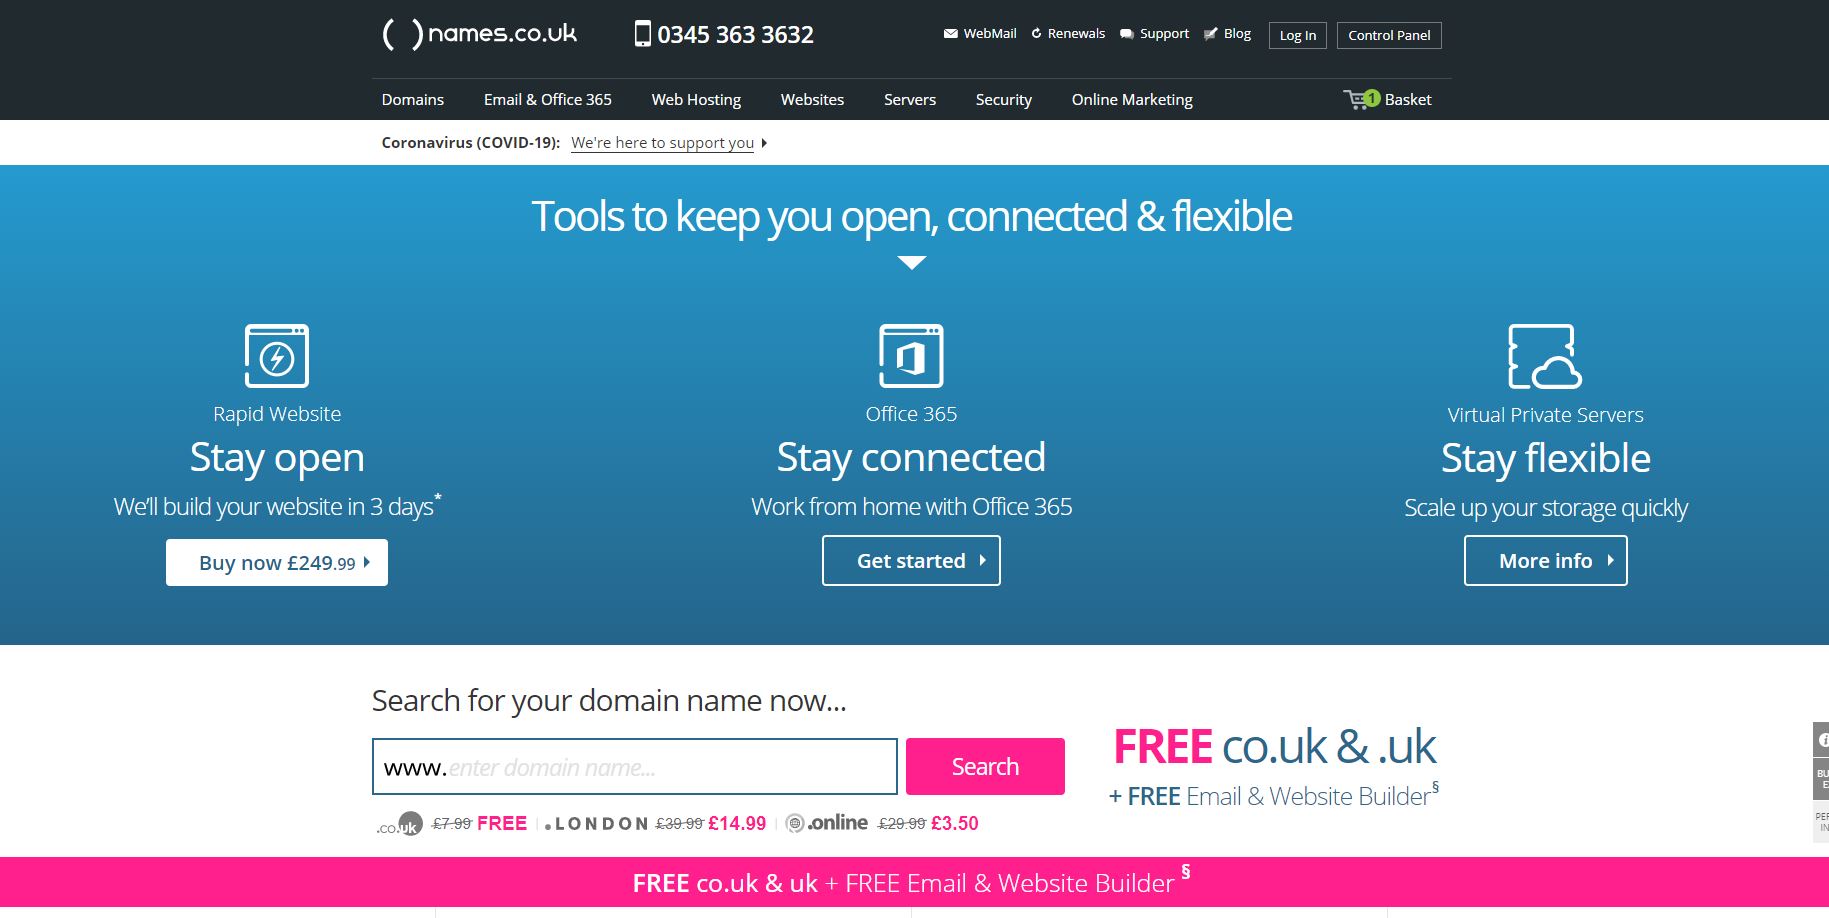 What is the .co.uk Domain Meaning?